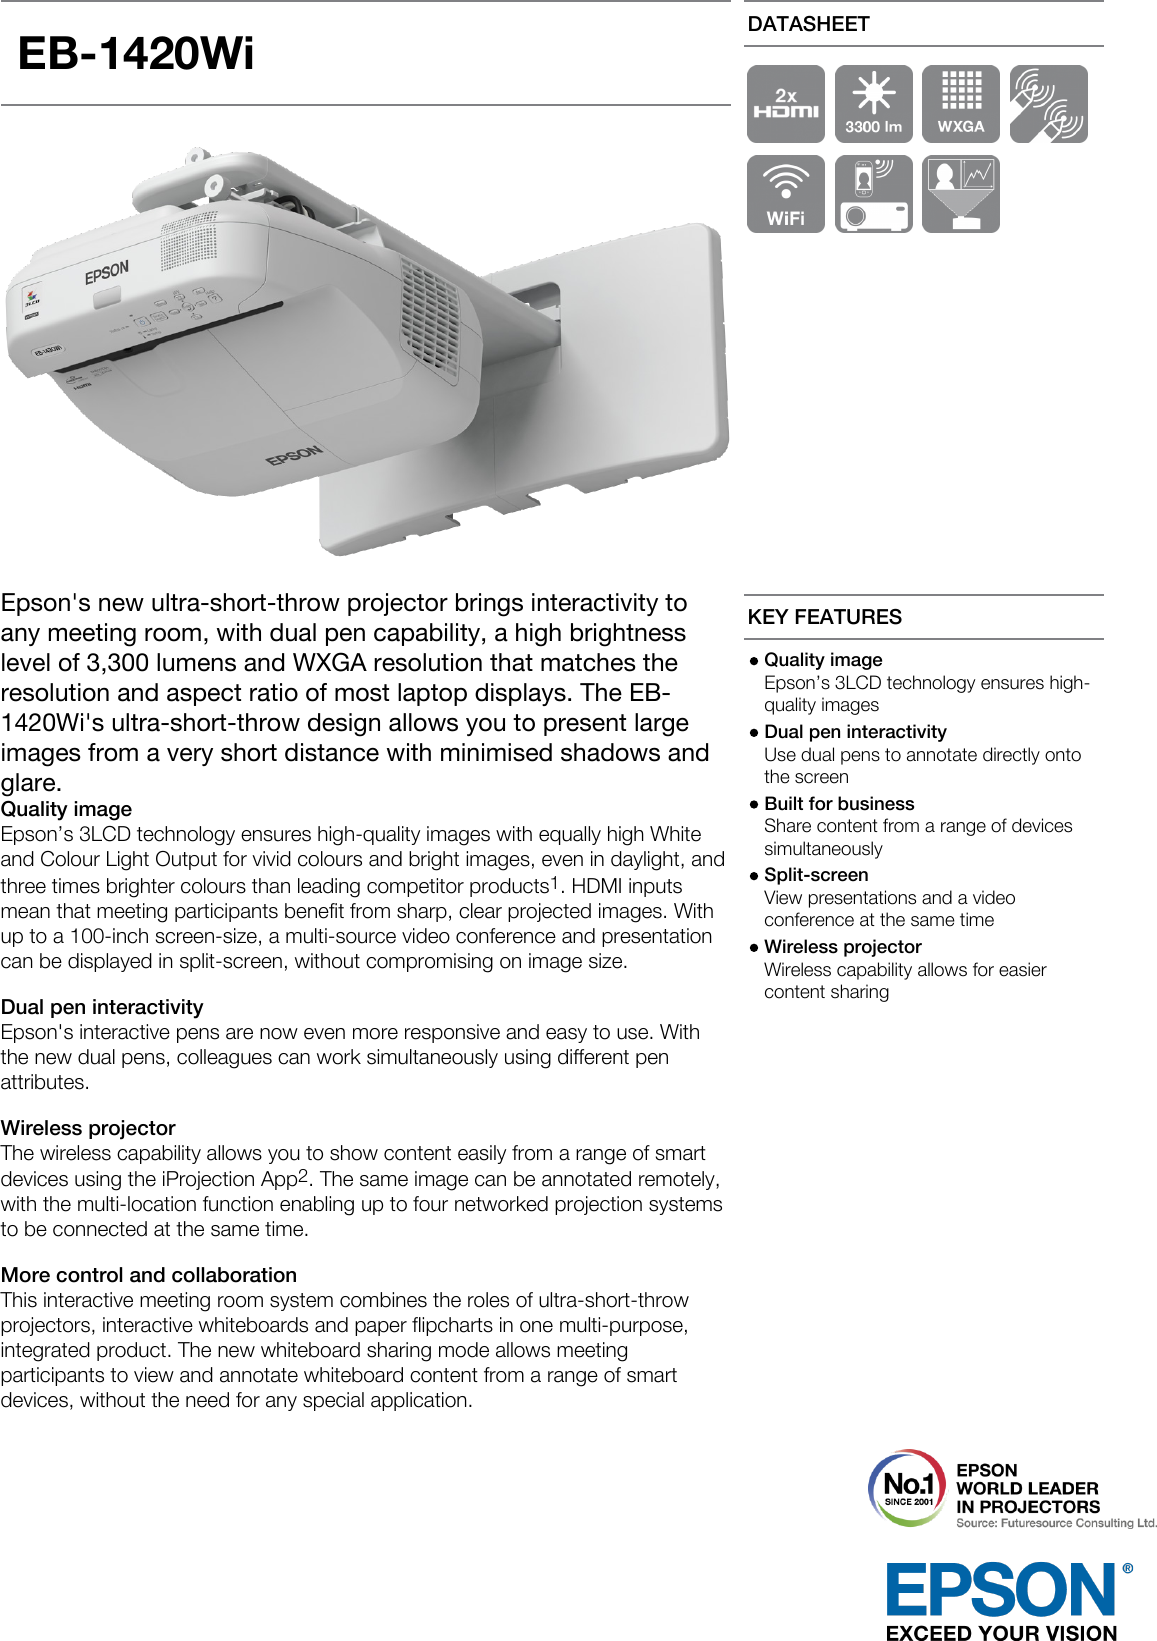 Page 1 of 2 - Eb1420Wi User Manual